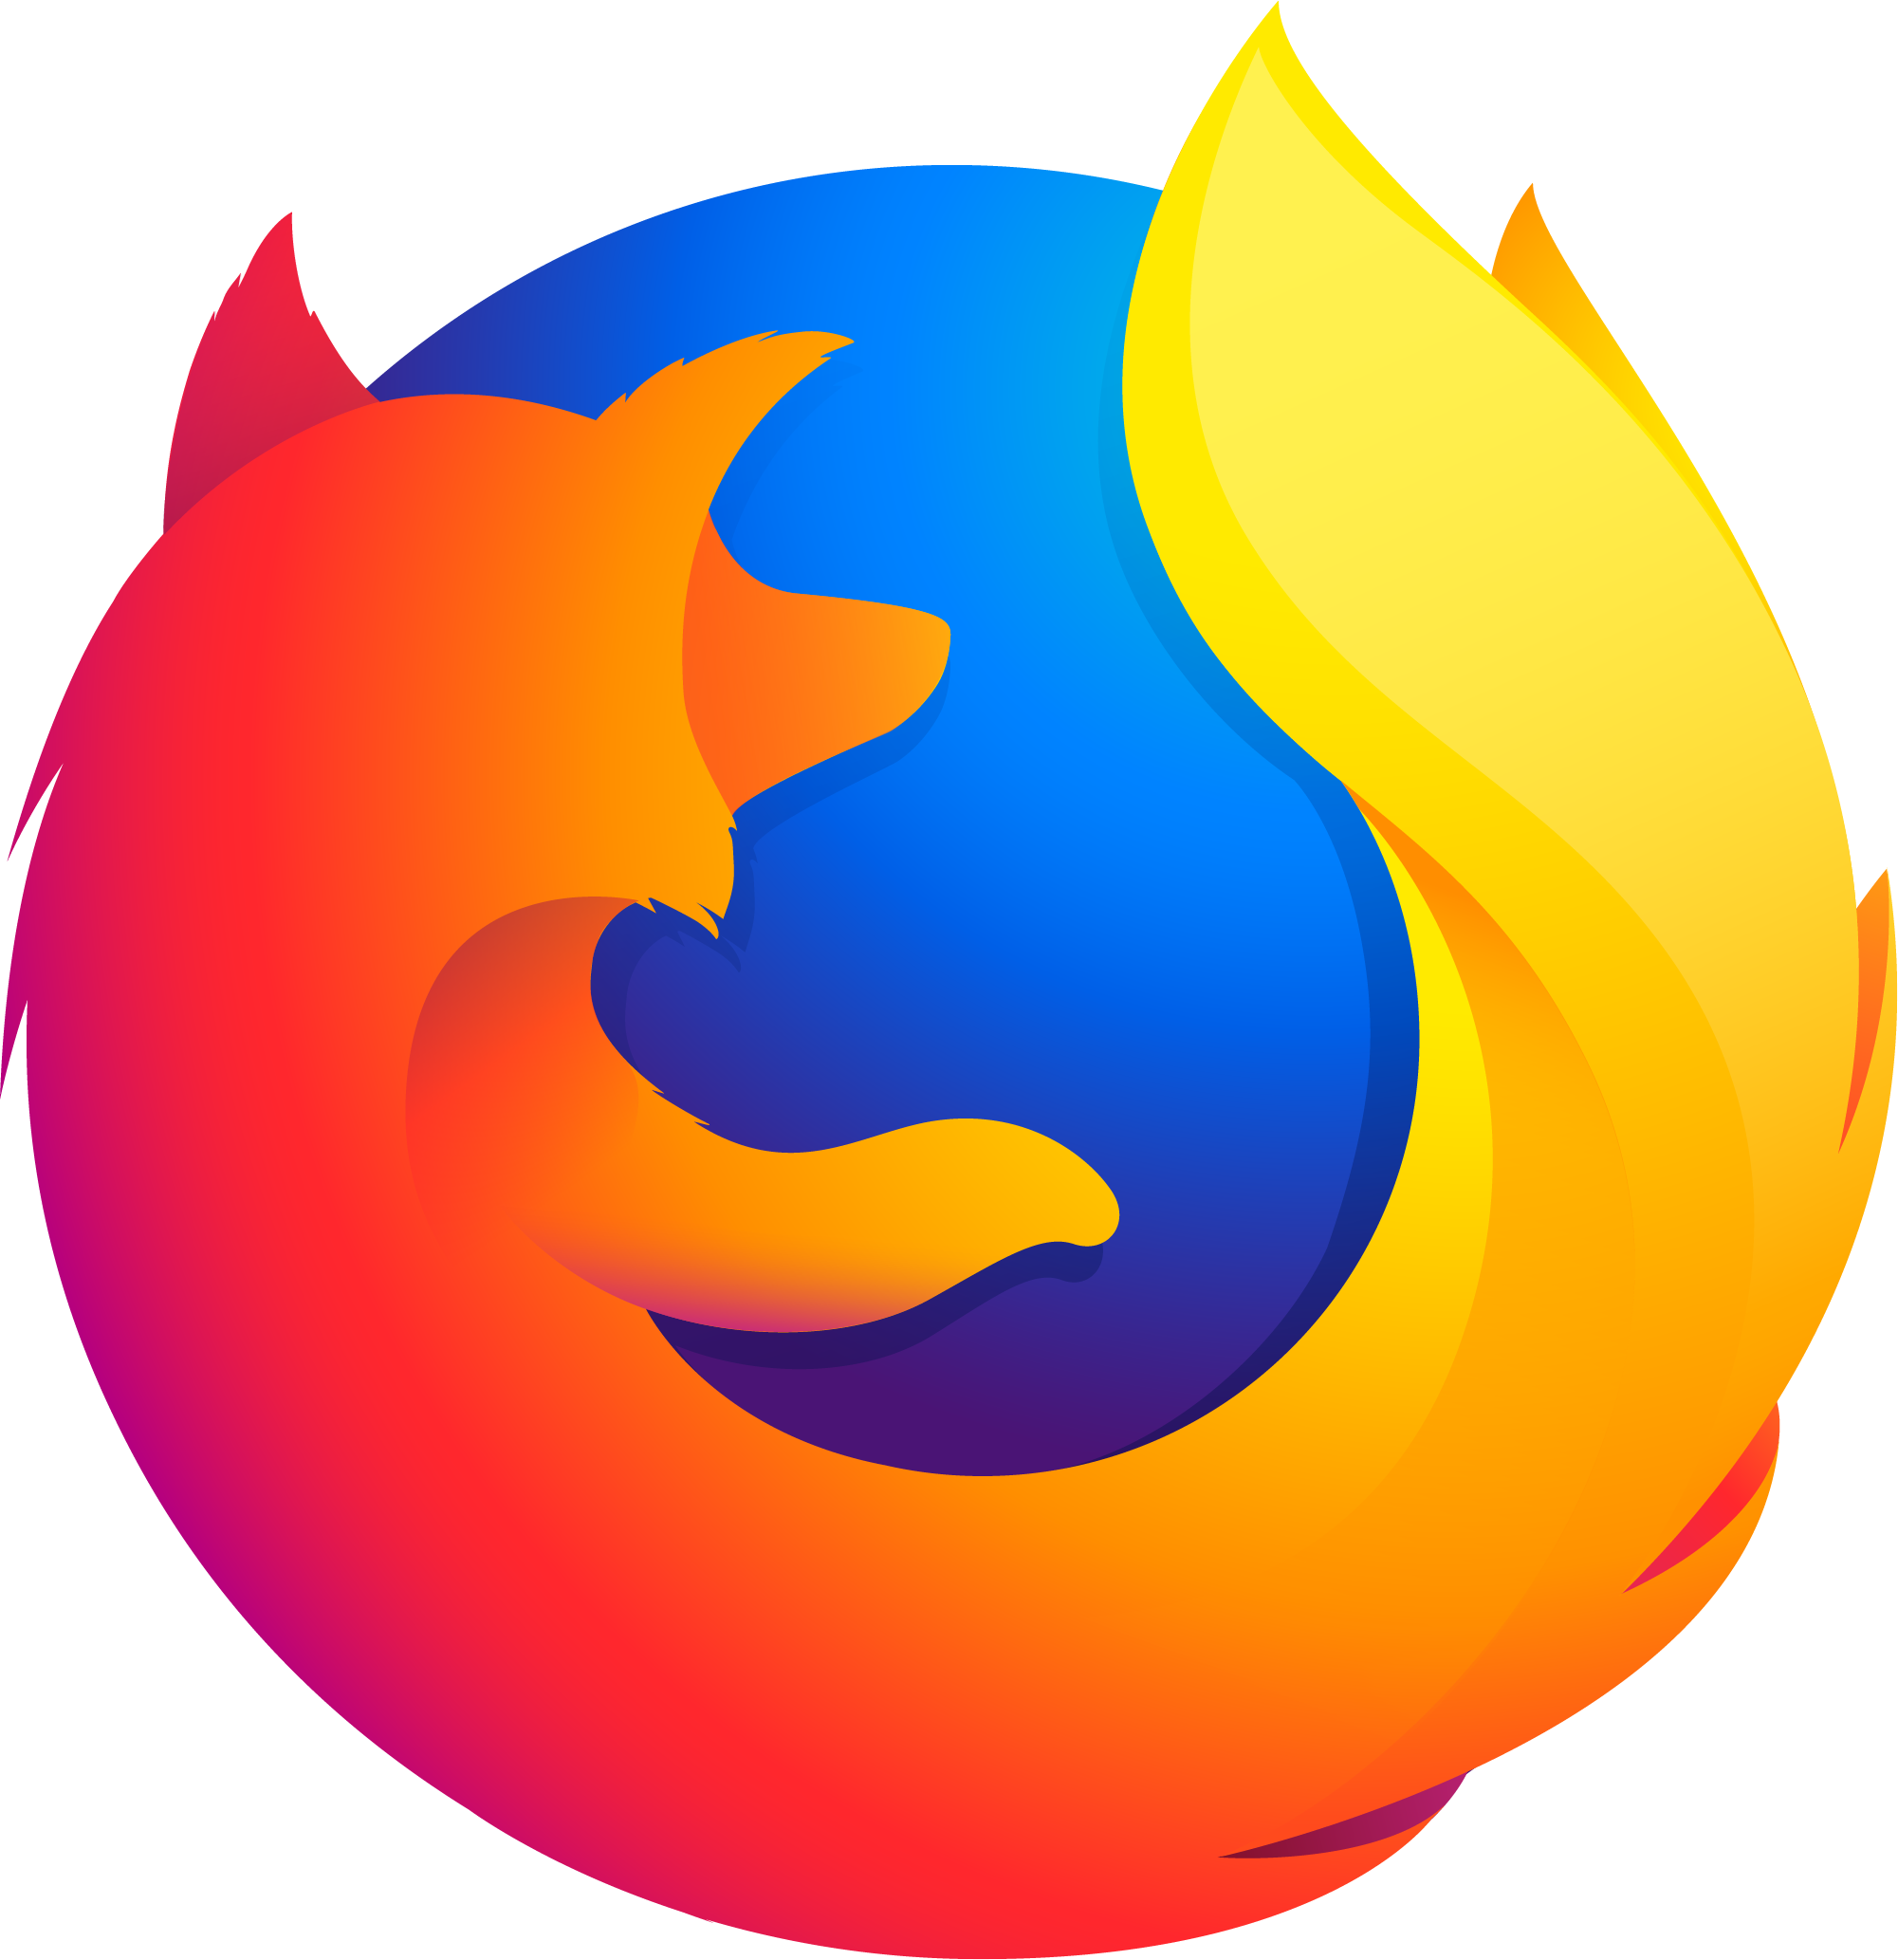 The icon of the Mozilla Firefox browser.